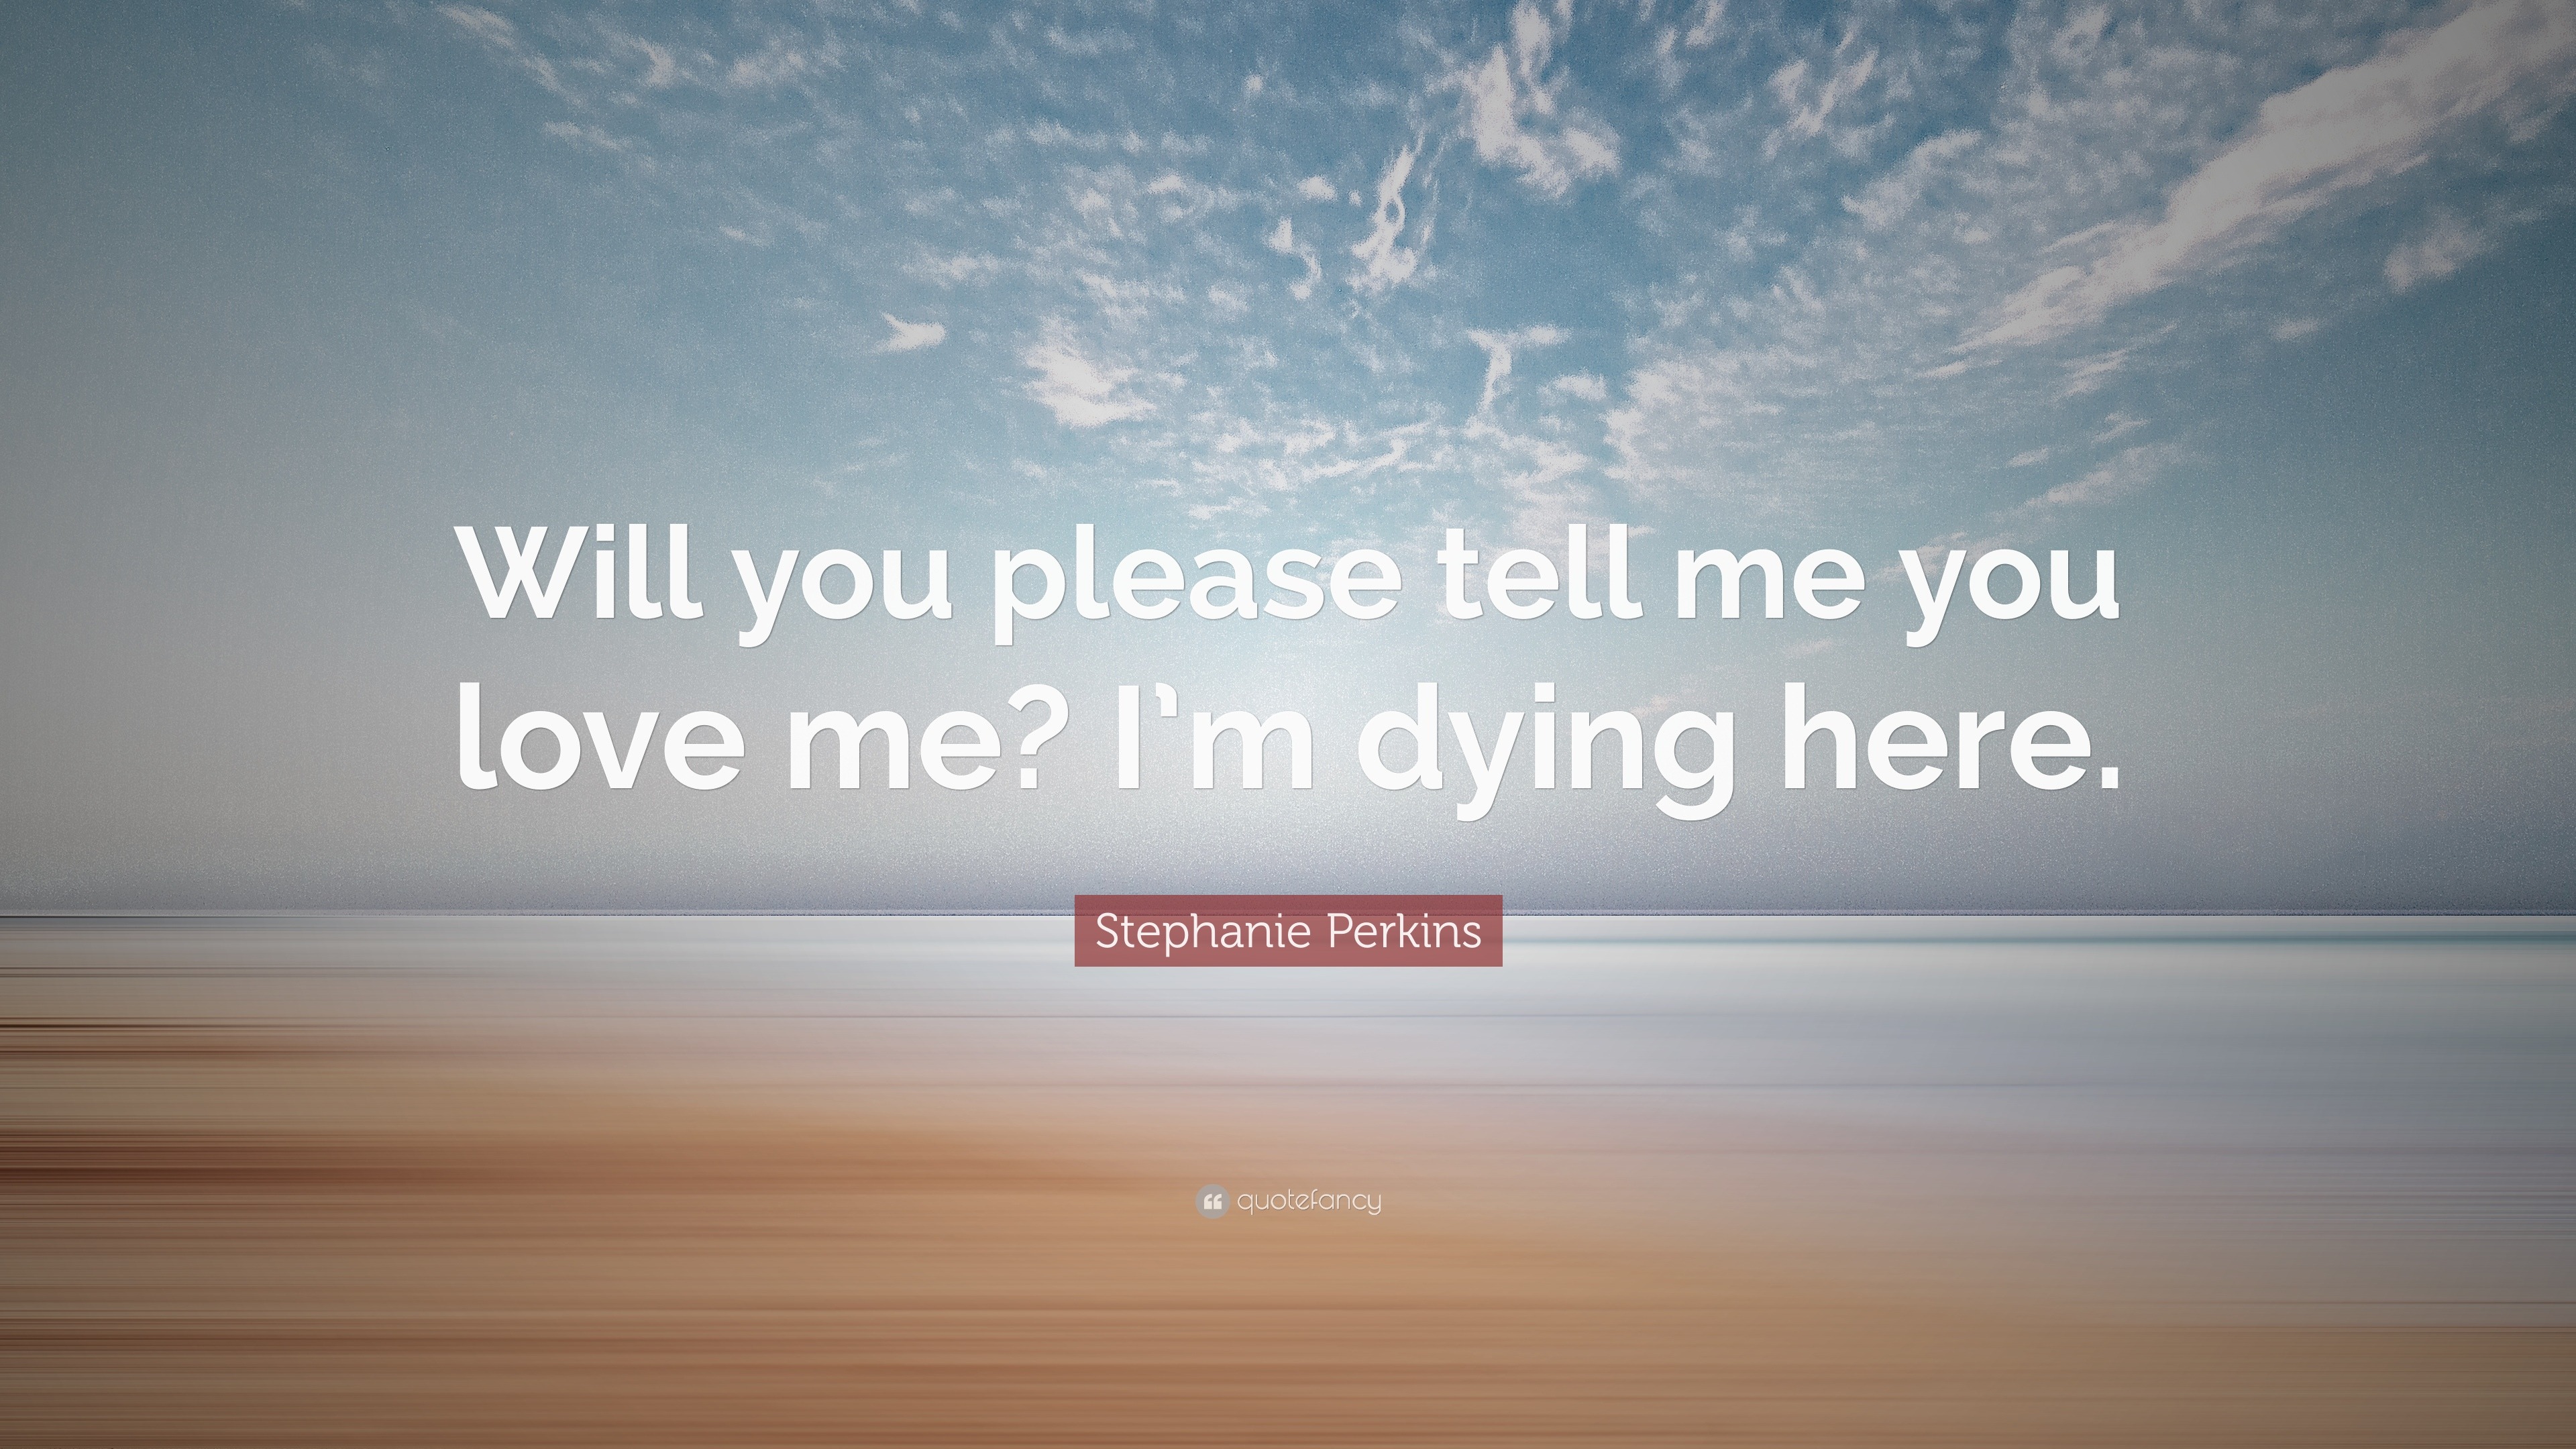 Stephanie Perkins Quote “Will you please tell me you love me I